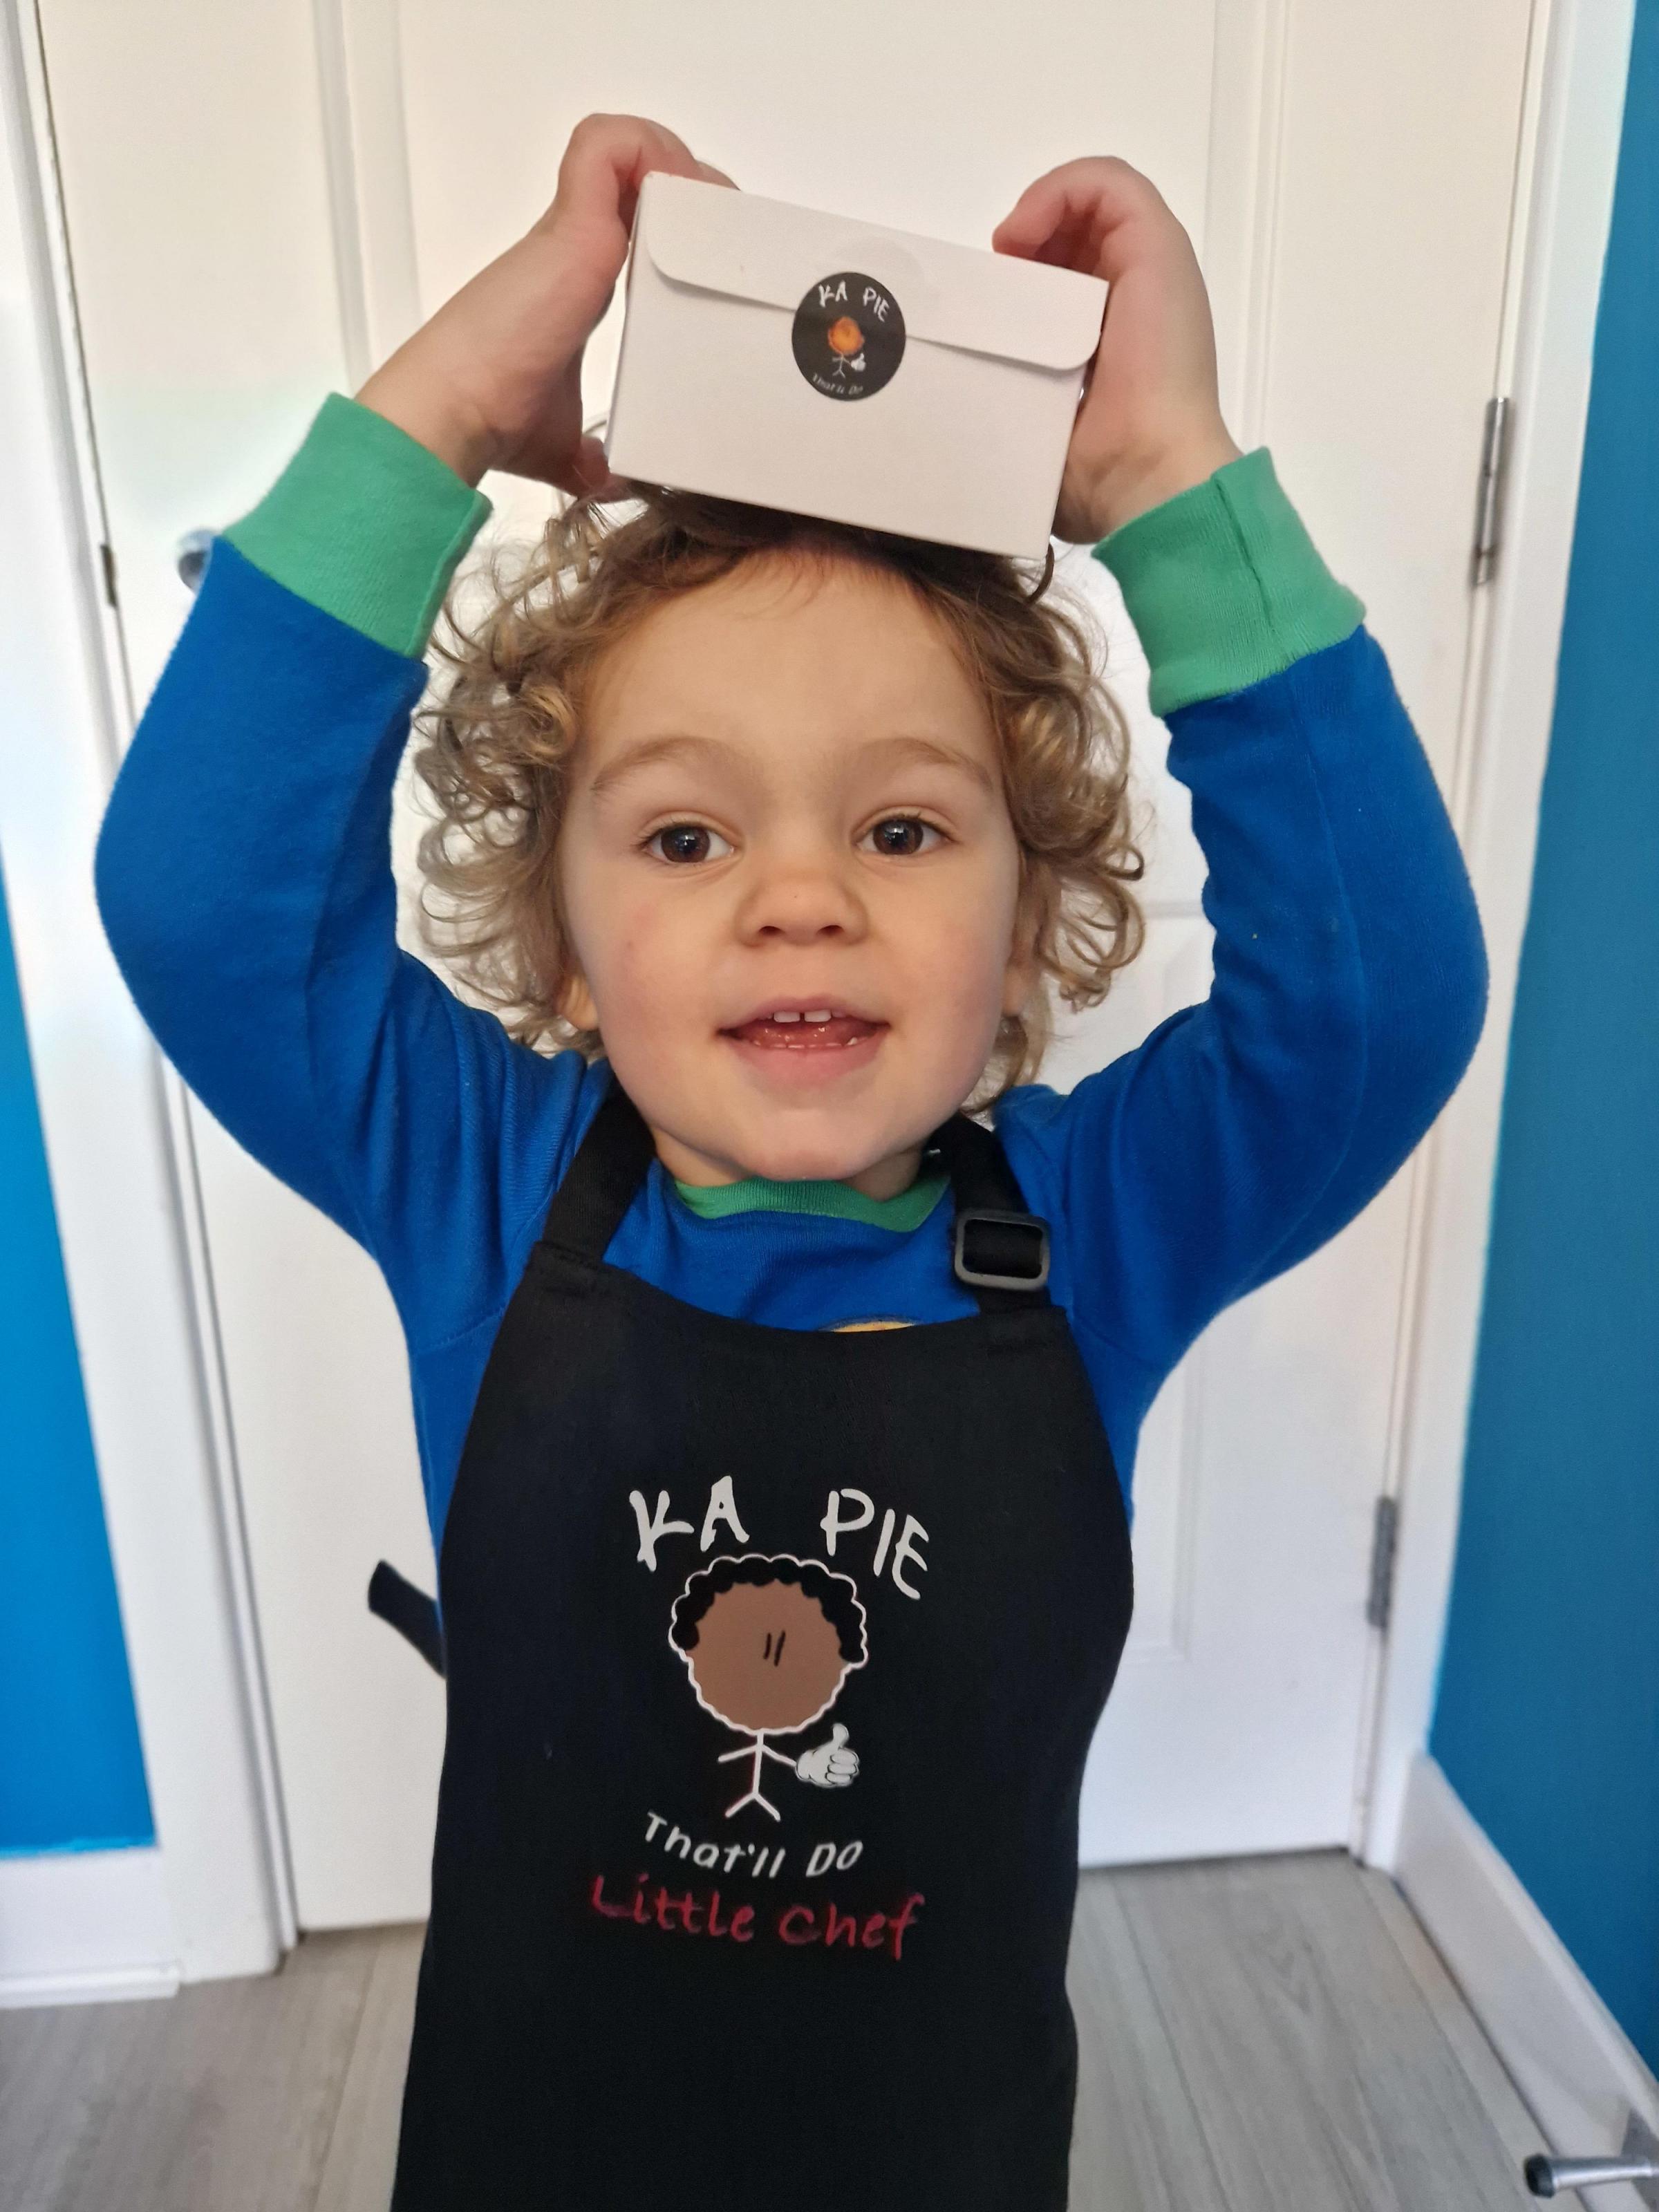 Three-and-a-half-year-old Lennon, who welcomes customers waiting to pick up dads pies